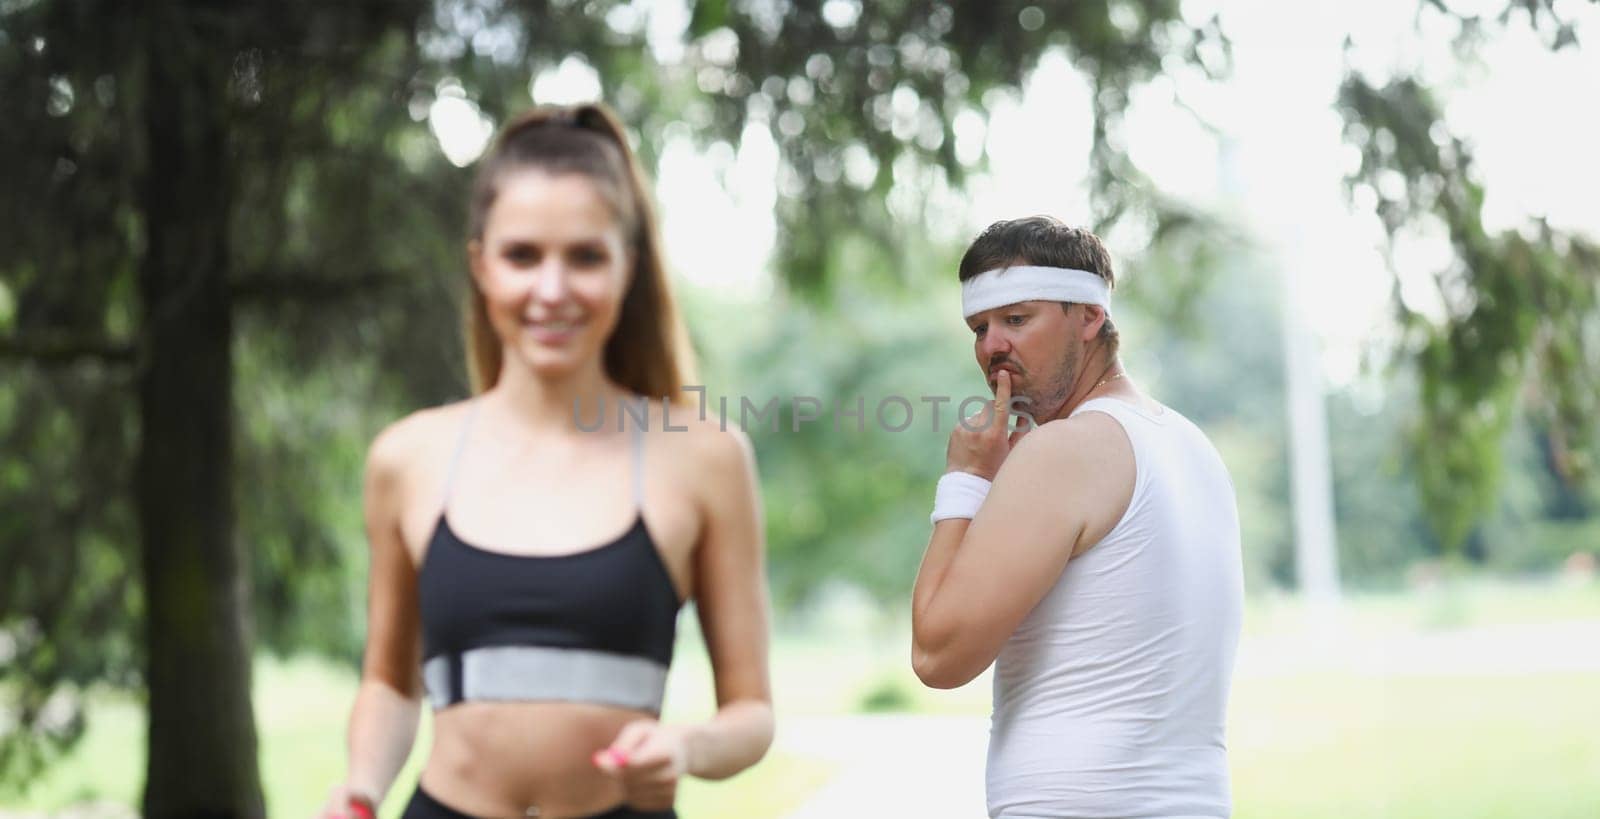 Middle aged man check on young beautiful fit woman running in park by kuprevich